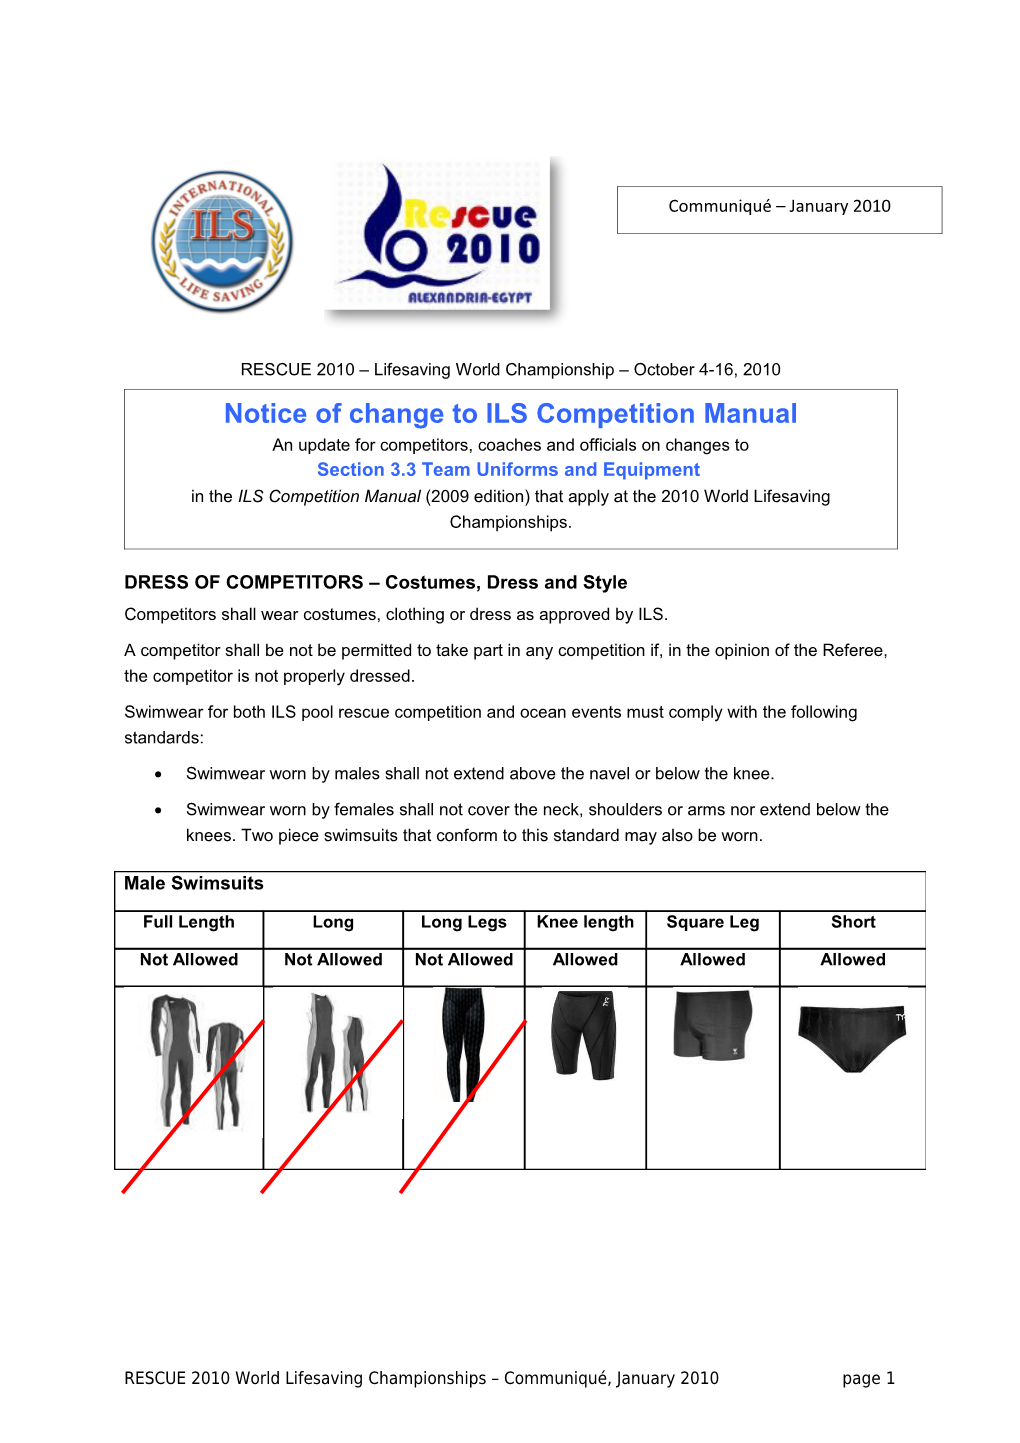 Notice of Change to ILS Competition Manual